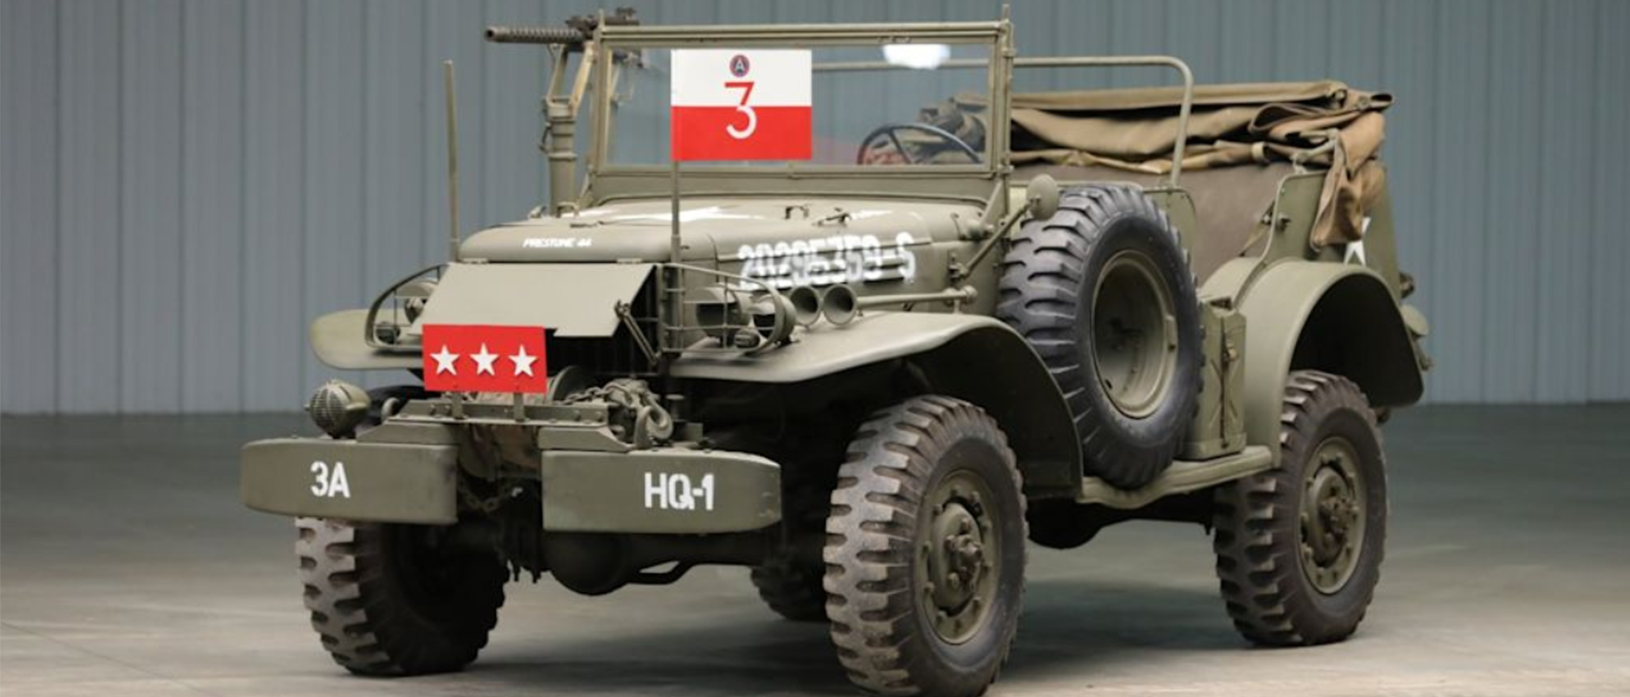 Dodge WWII Vehicle is Auction Bound